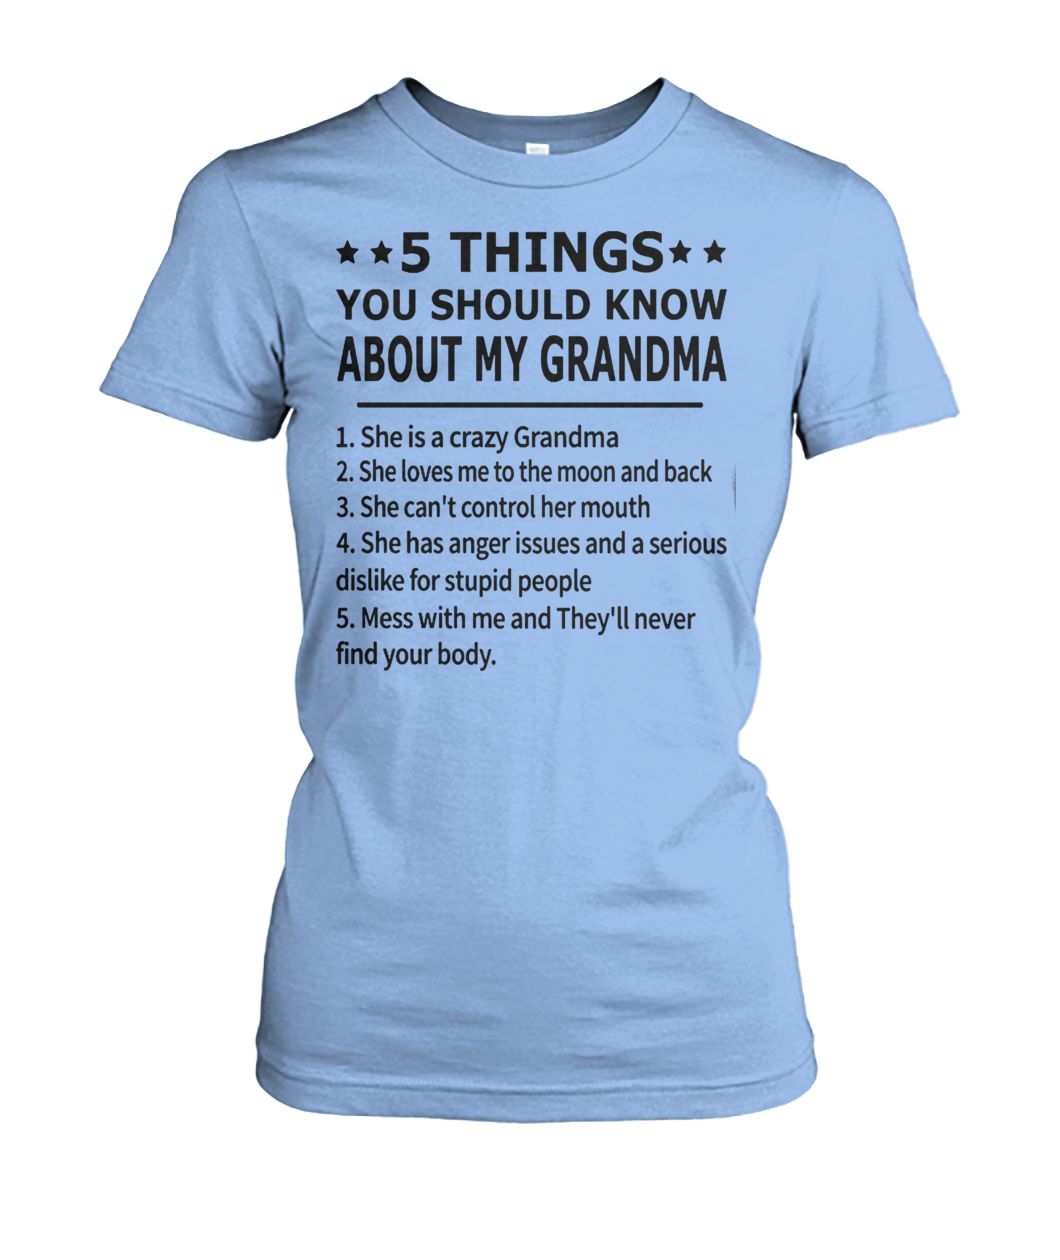 5 things you should know about my grandma women's crew tee